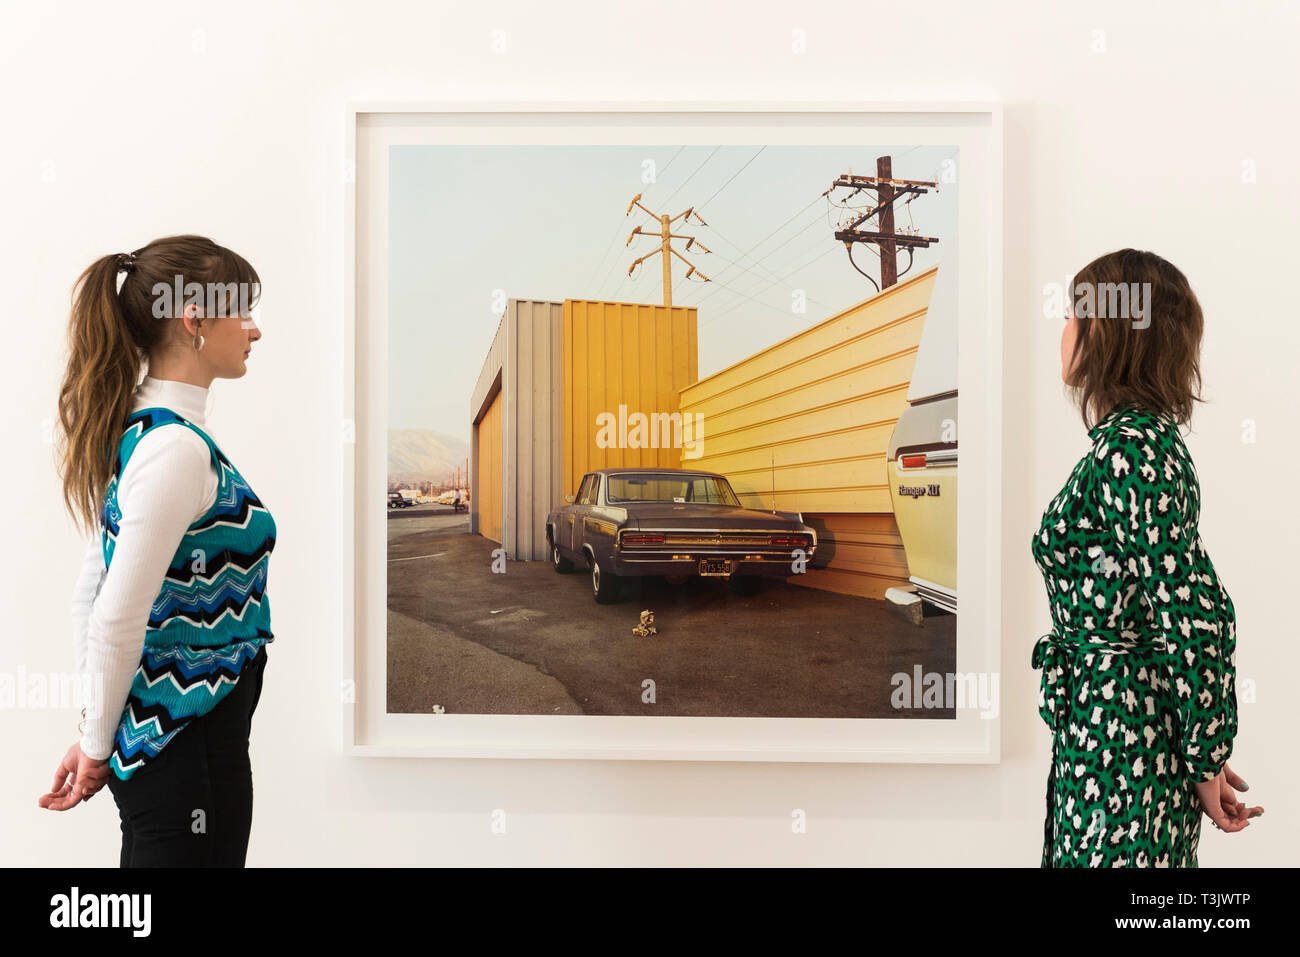 London, UK.  10 April 2019.  Staff members view a work by American photographer William Eggleston at his new exhibition '2¼' at the David Zwirner gallery in Mayfair.  The show comprises a series of square-format colour photographs taken around 1977 throughout California and the American South and will run April 12 to June 1, 2019.  Credit: Stephen Chung / Alamy Live News Stock Photo